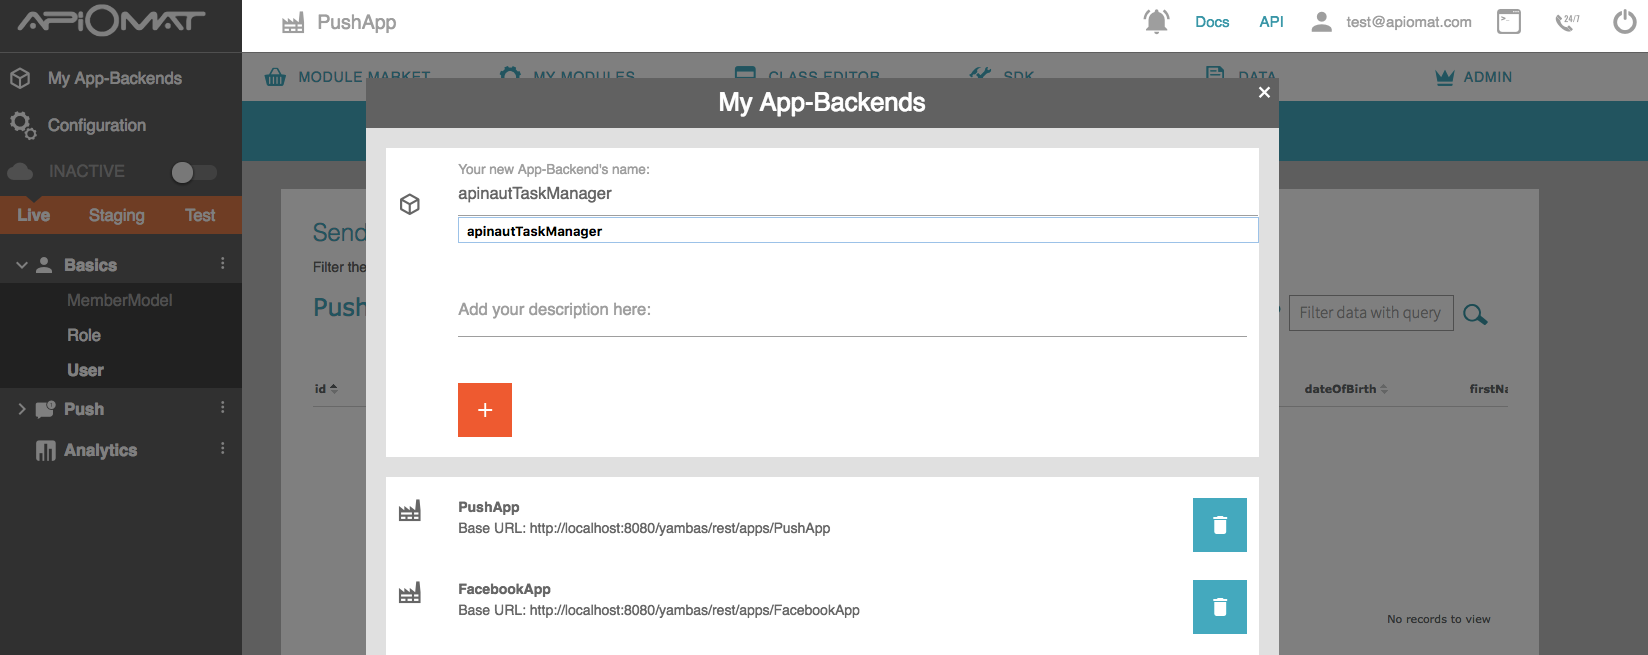 images/download/attachments/12649076/taskManager_newBackend.png